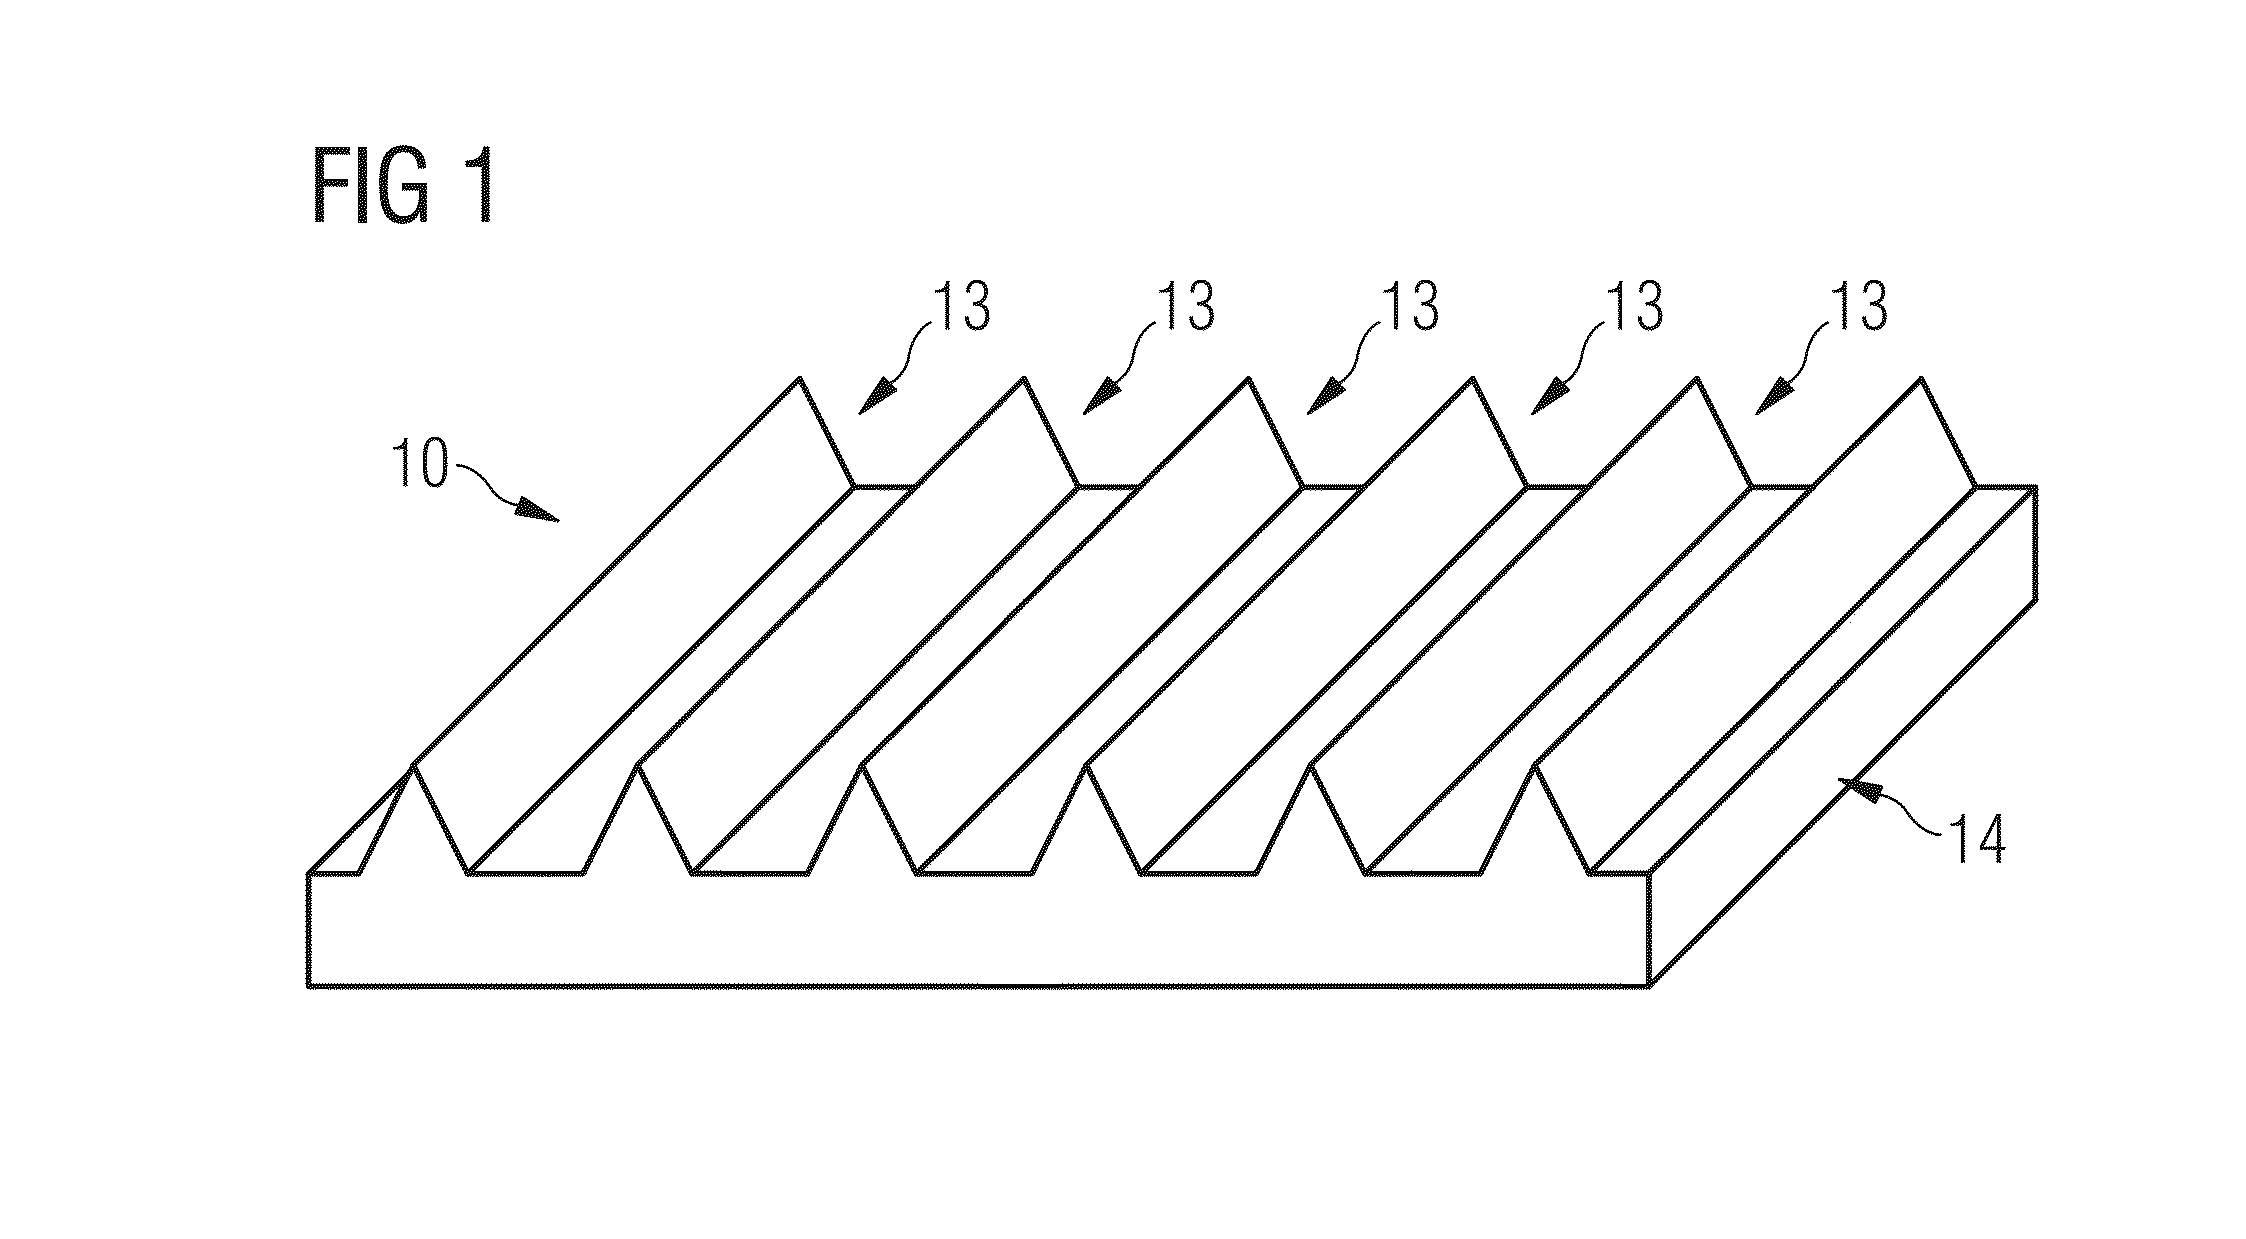 Method for Producing a Surface of a Component, Said Surface Having Reduced Drag and Component with Reduced Drag